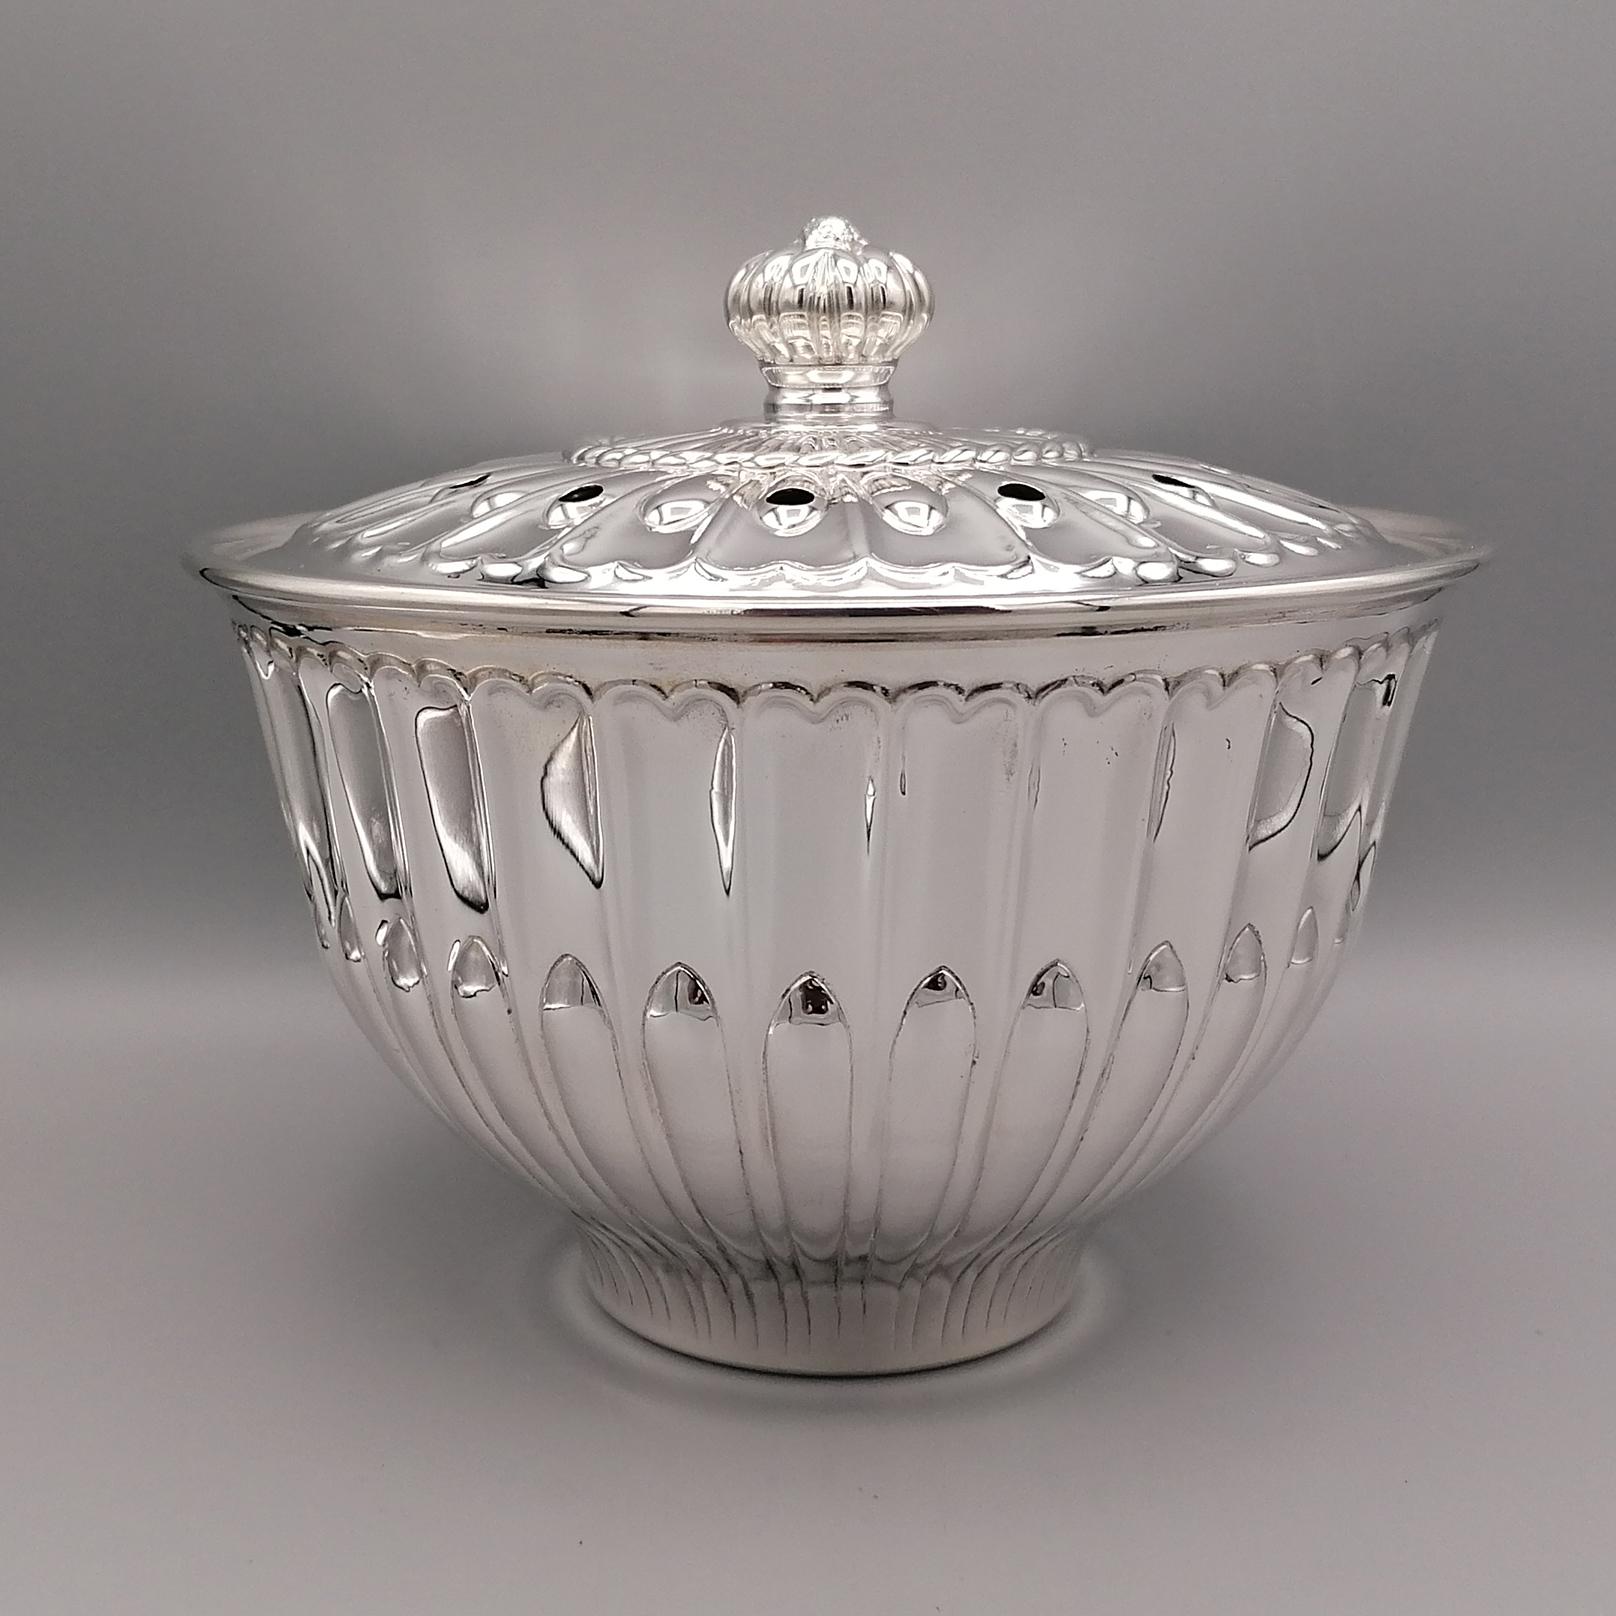 This Sterling Silver essence holder box was handmade in Milan - Italy by Vavassori silverware.
The body of the box is shaped, having a larger upper part and slopes towards the base with a smaller diameter.
The essence holder box is characterized